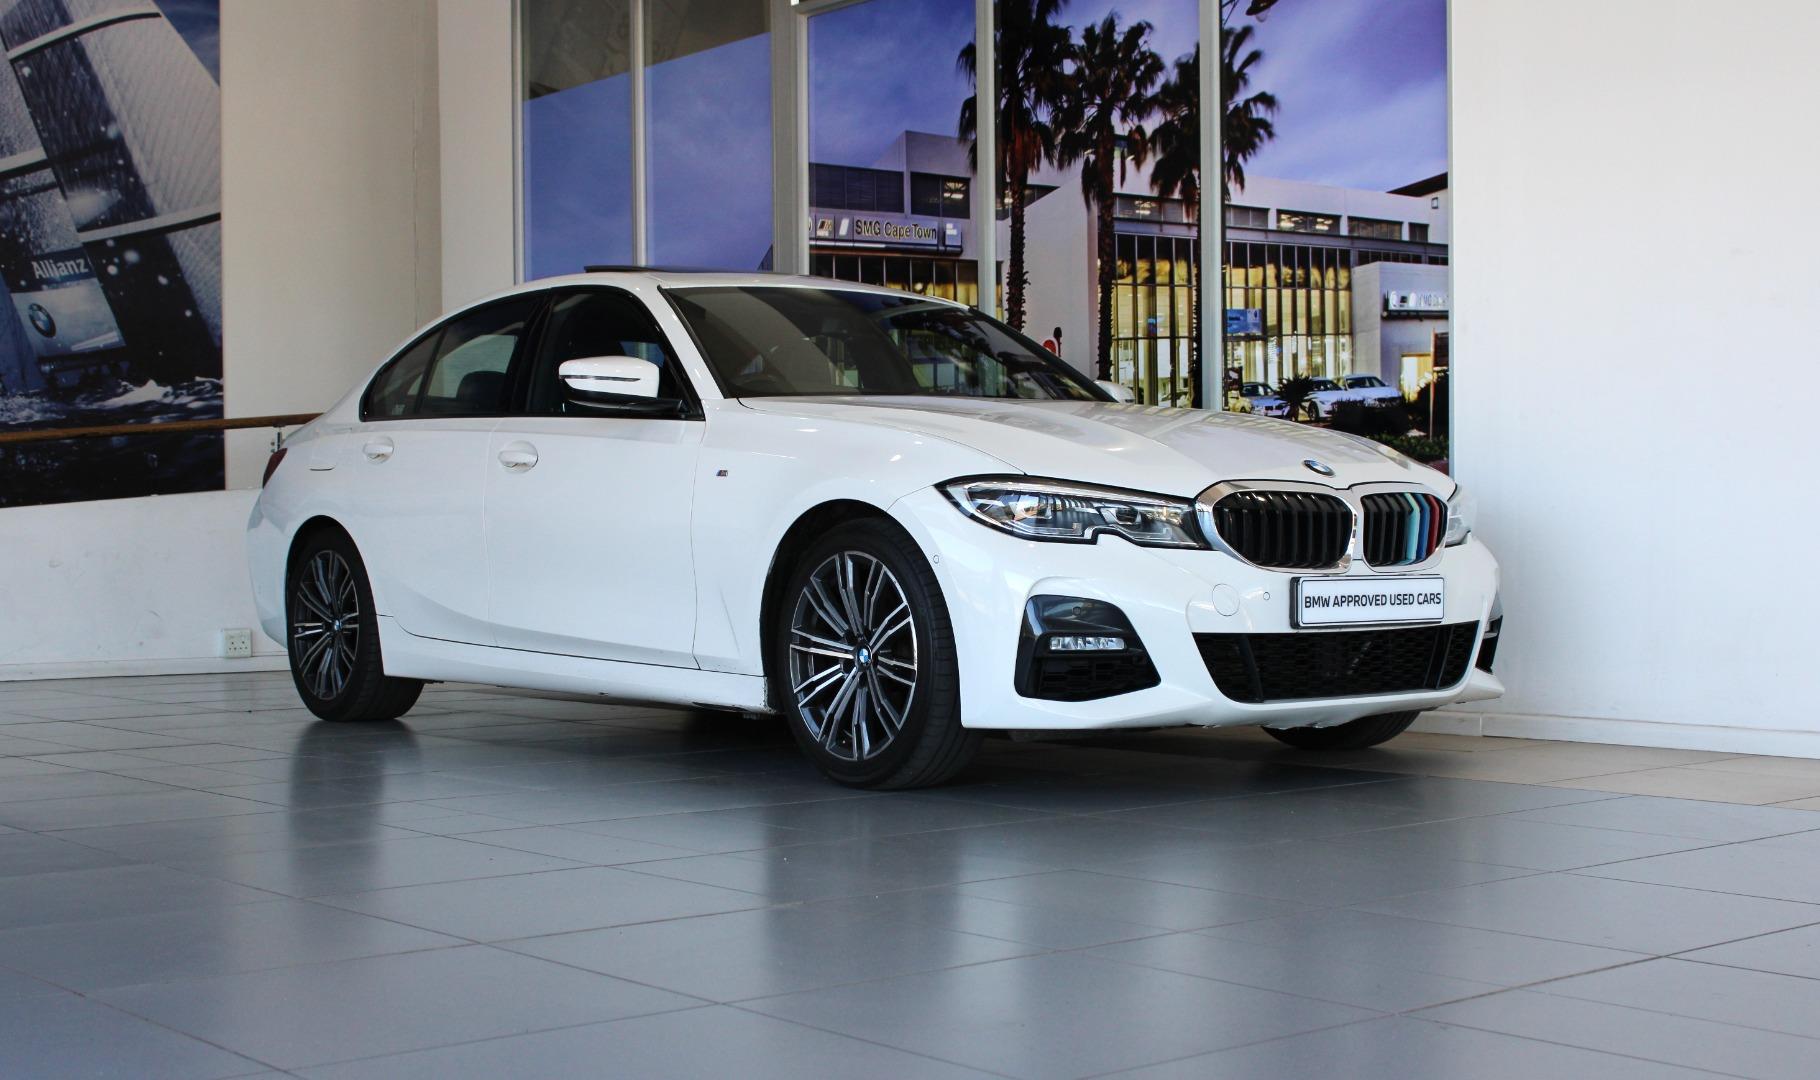 2020 BMW 320i M SPORT AT (G20)  for sale - SMG12|USED|115353